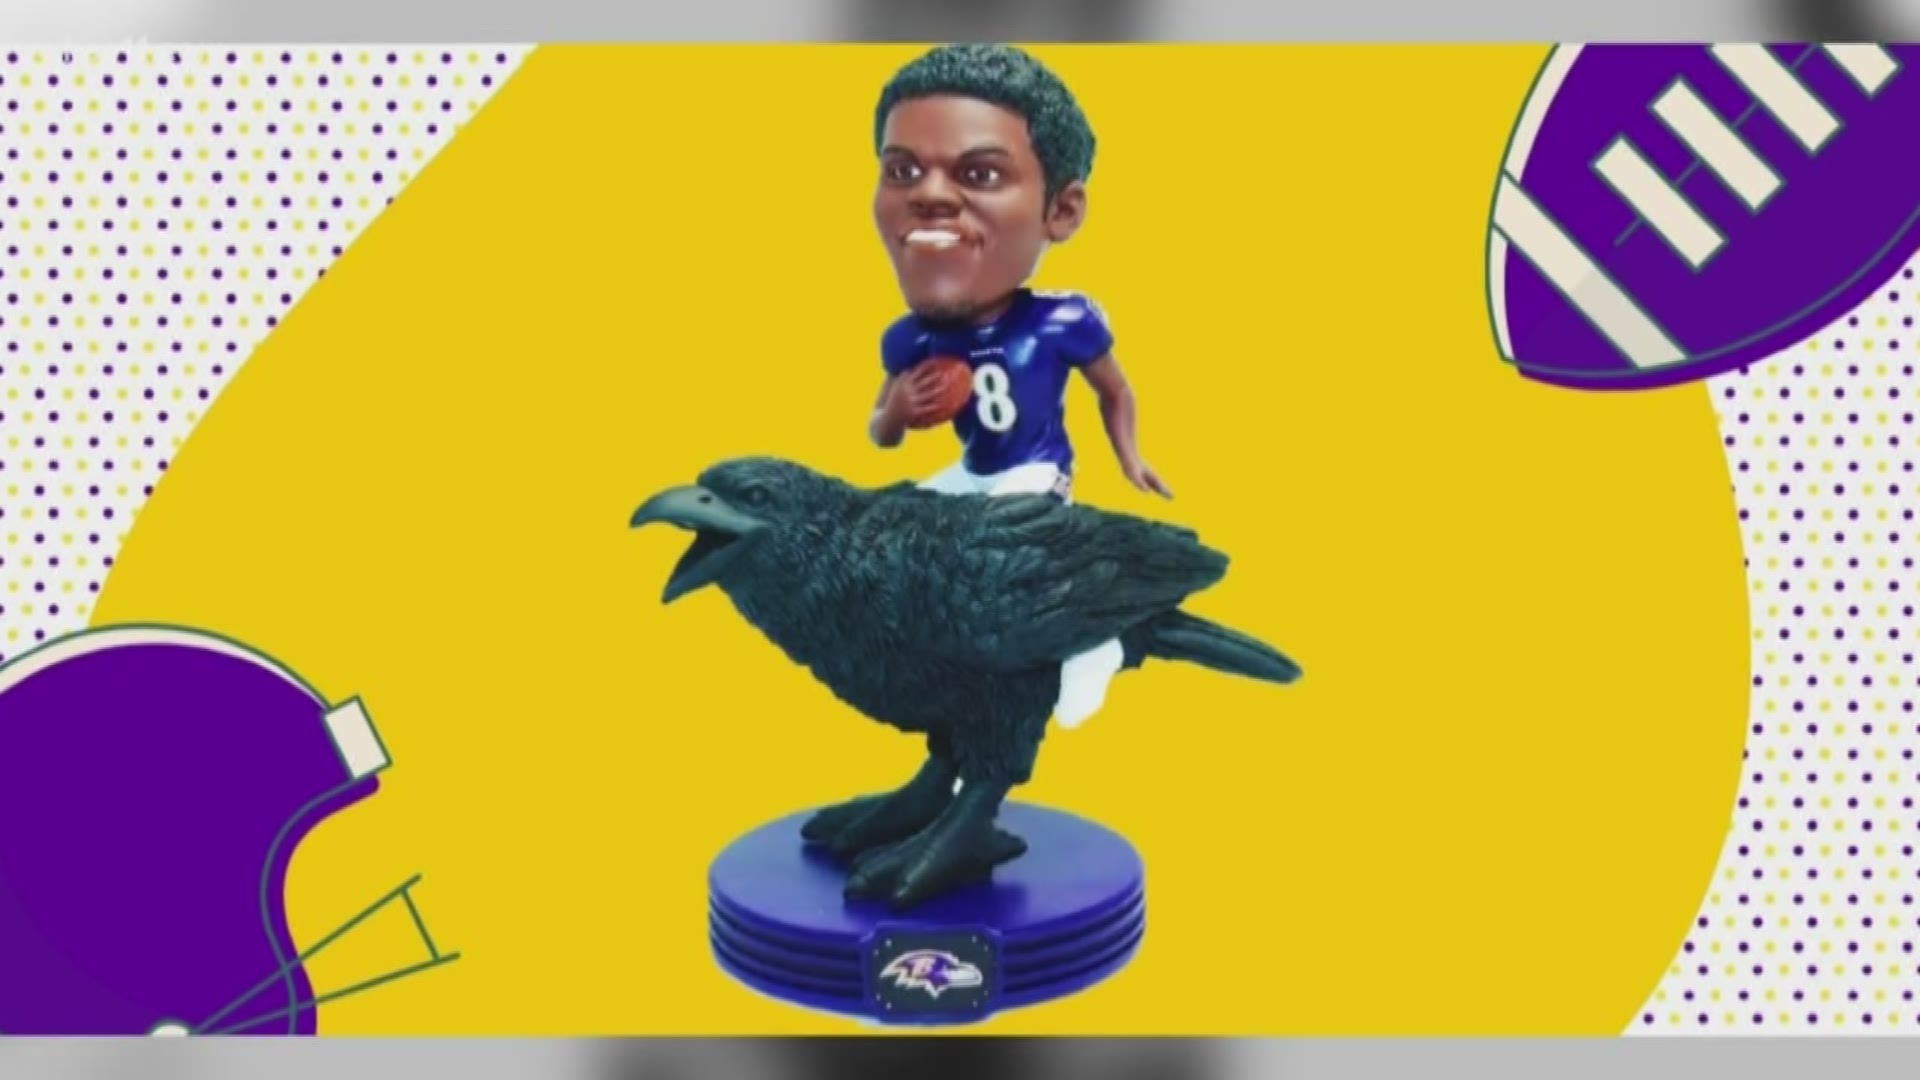 The bobblehead features the Ravens quarterback riding on the back of an actual raven. Only 2,020 are available to purchase.